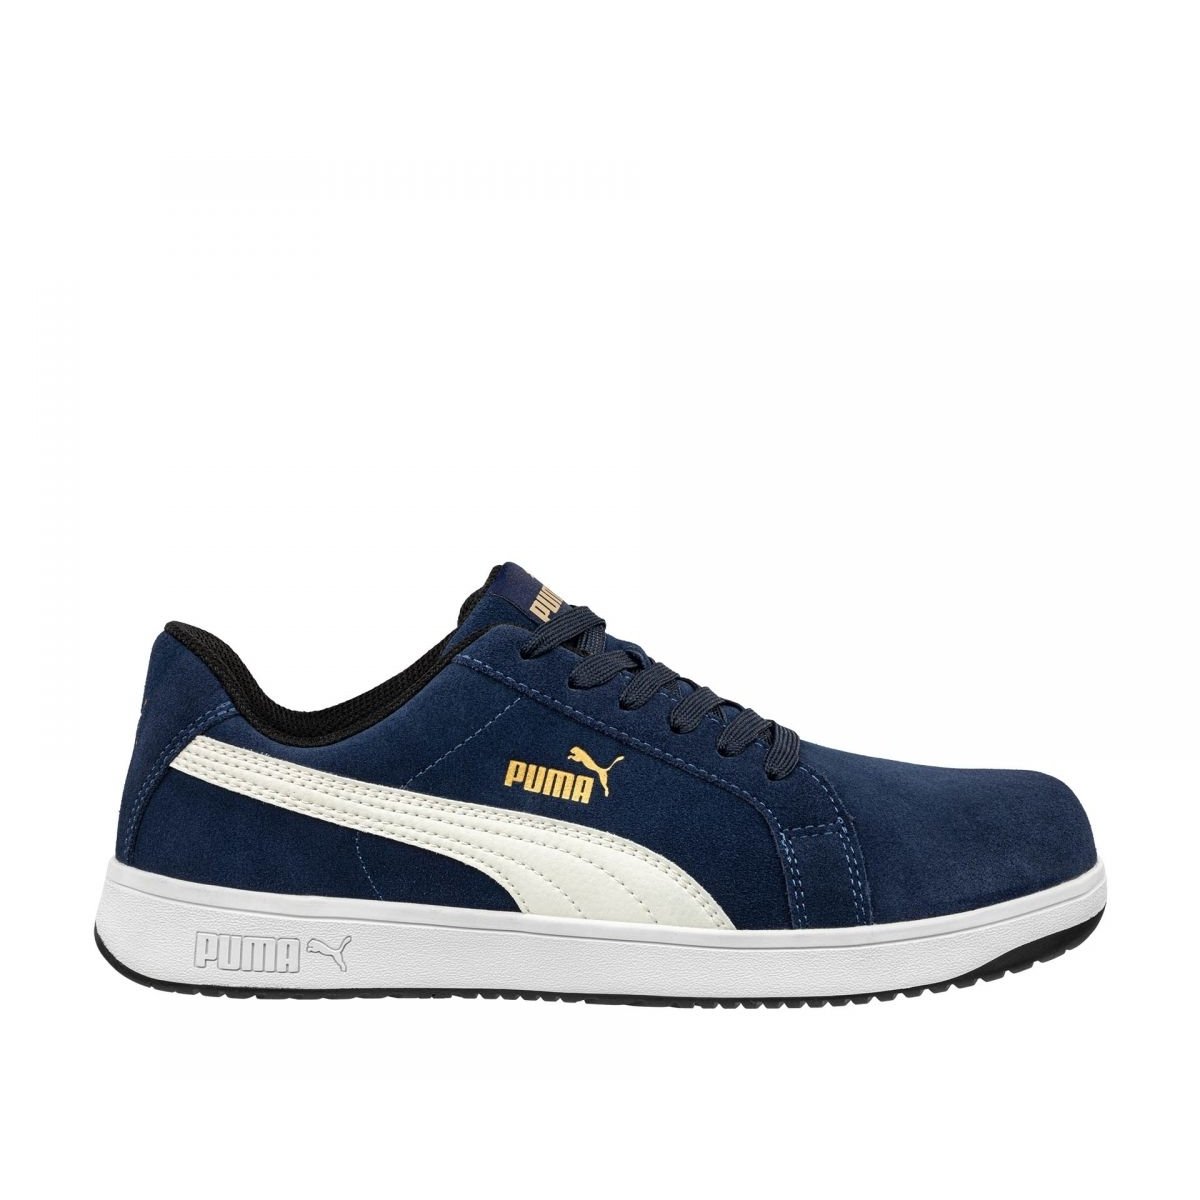 PUMA Safety Men's Iconic Low Composite Toe EH Work Shoes Navy Suede - 640025 ONE SIZE Navy - Navy, 14